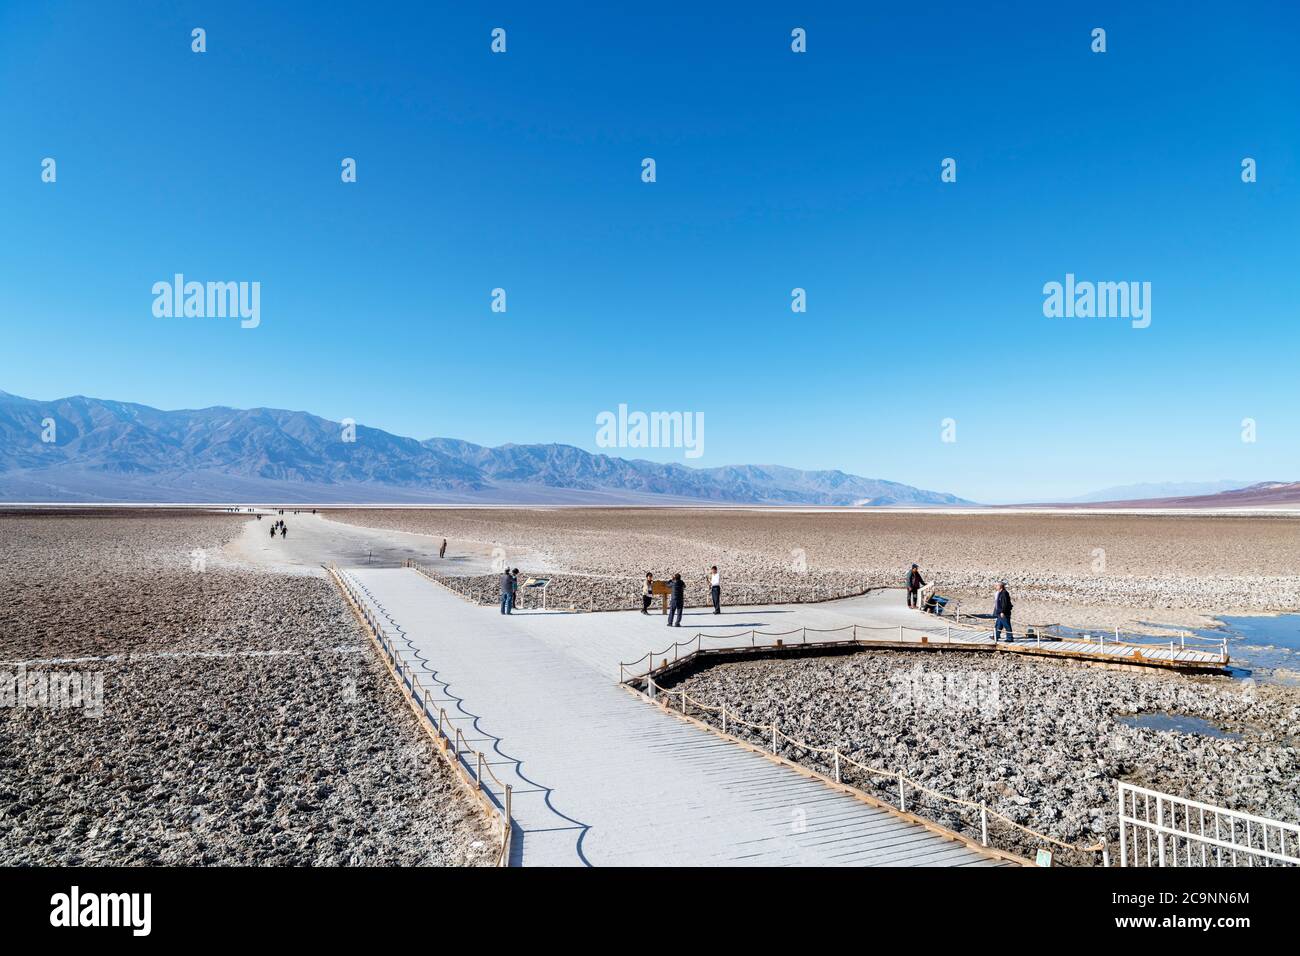 Tourists at Badwater Basin, the lowest point in North America, Death Valley National Park, California, USA Stock Photo